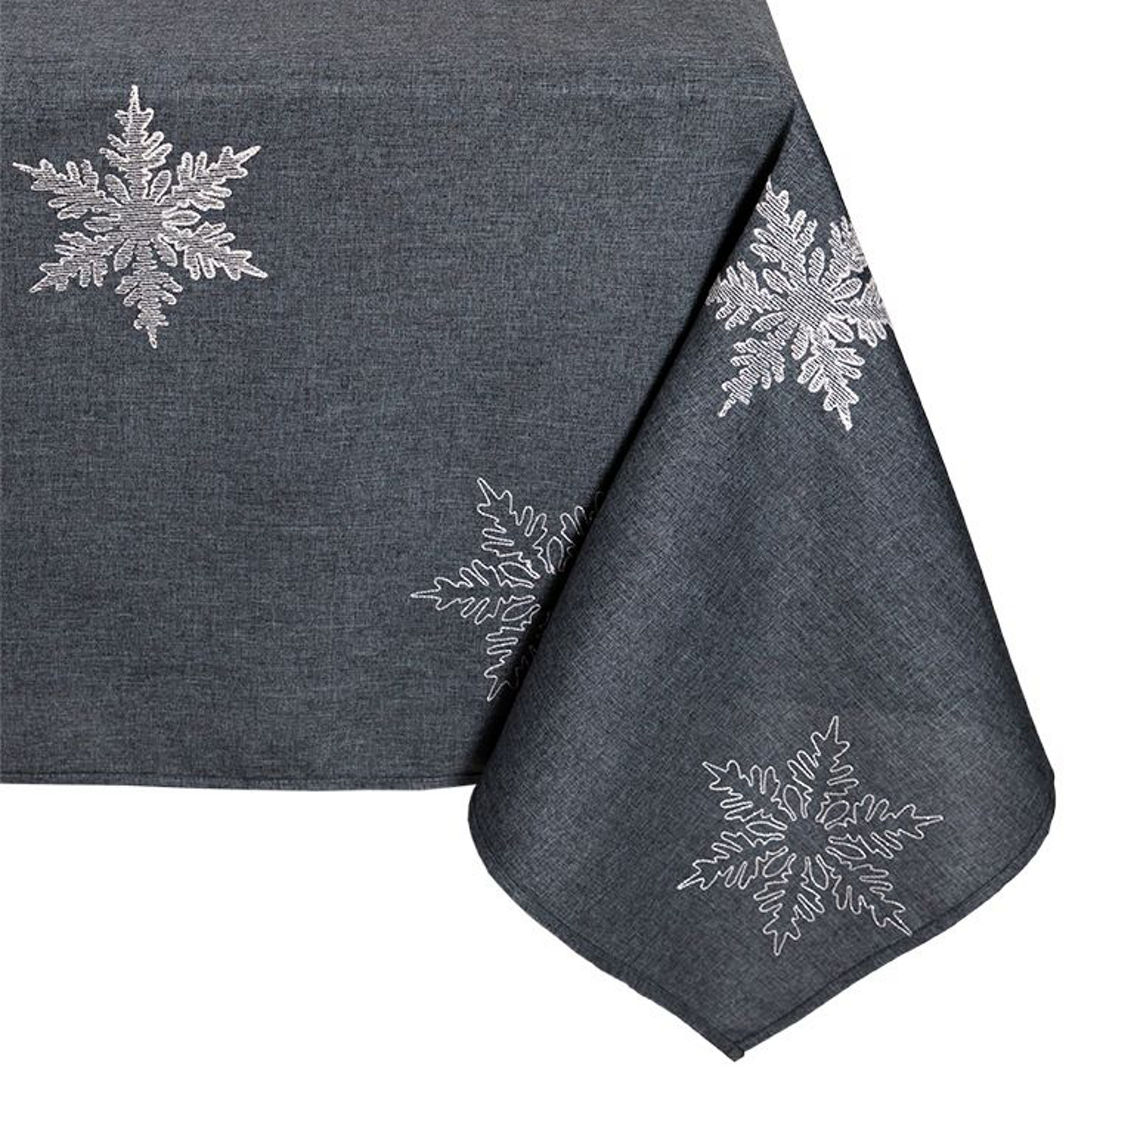 Manor Luxe, Glisten Embroidered Christmas Tablecloth, 60''X60'', Grey - Image 2 of 2